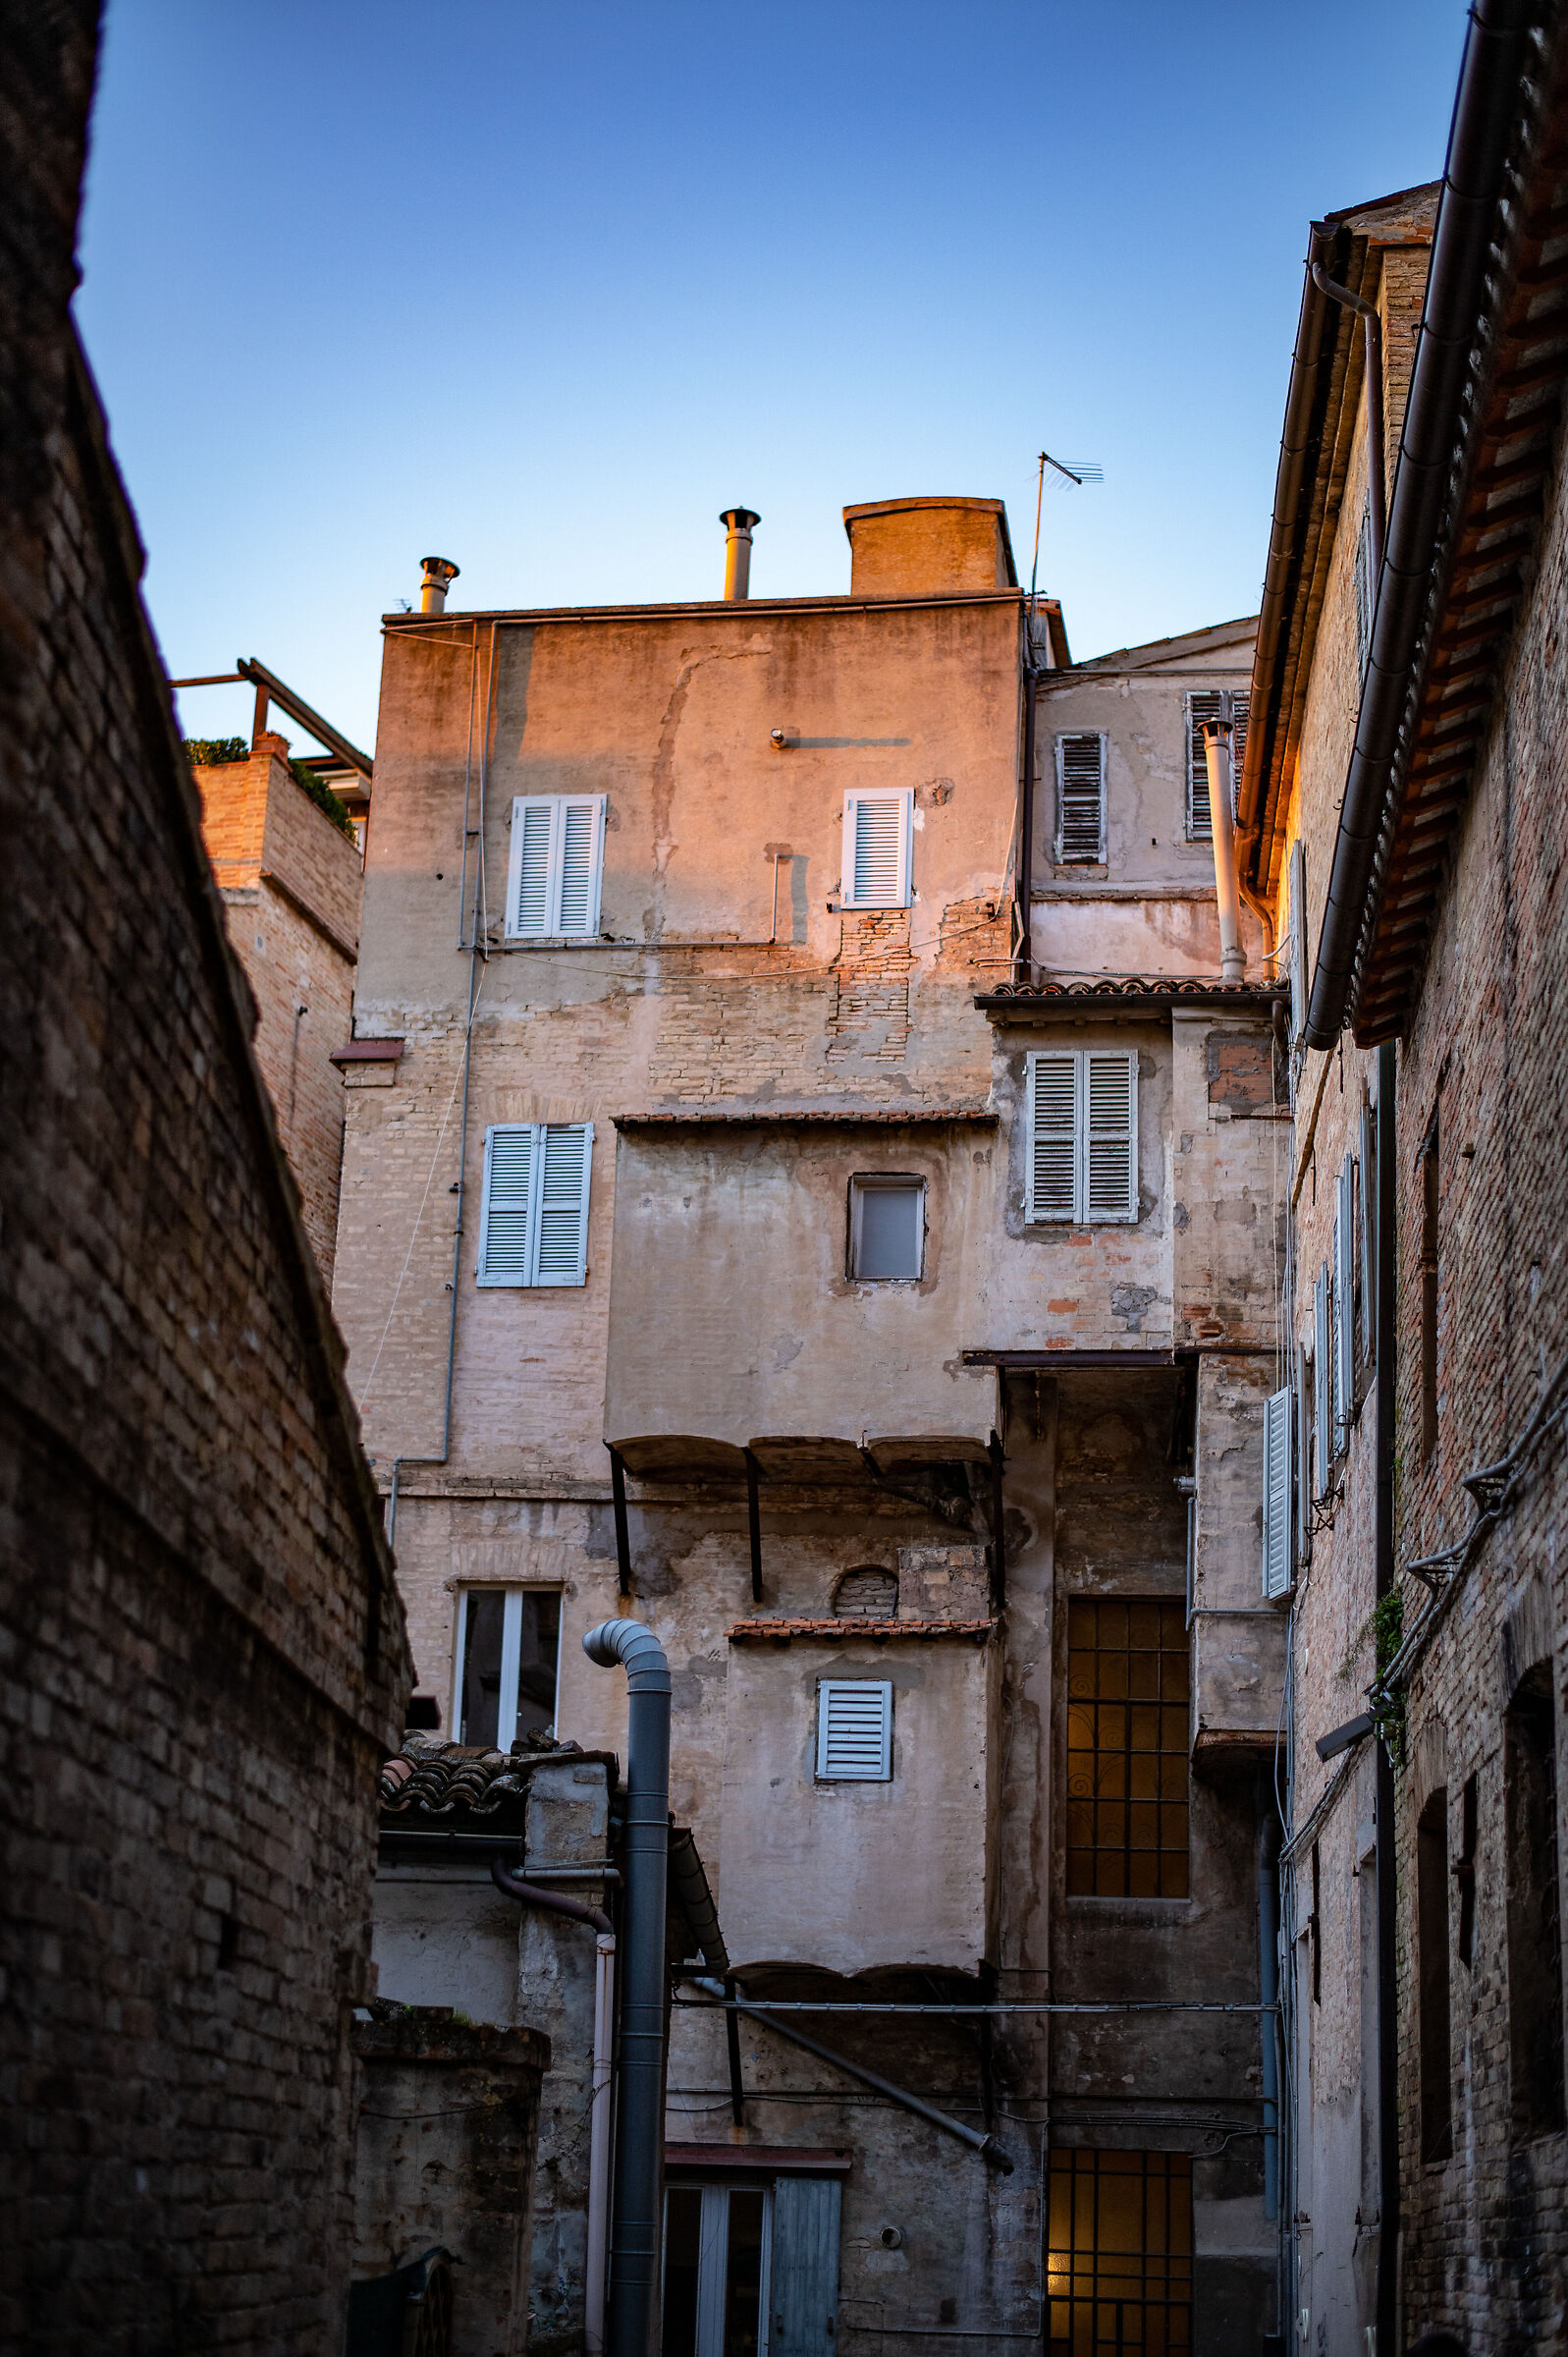 Macerata in the alleys...